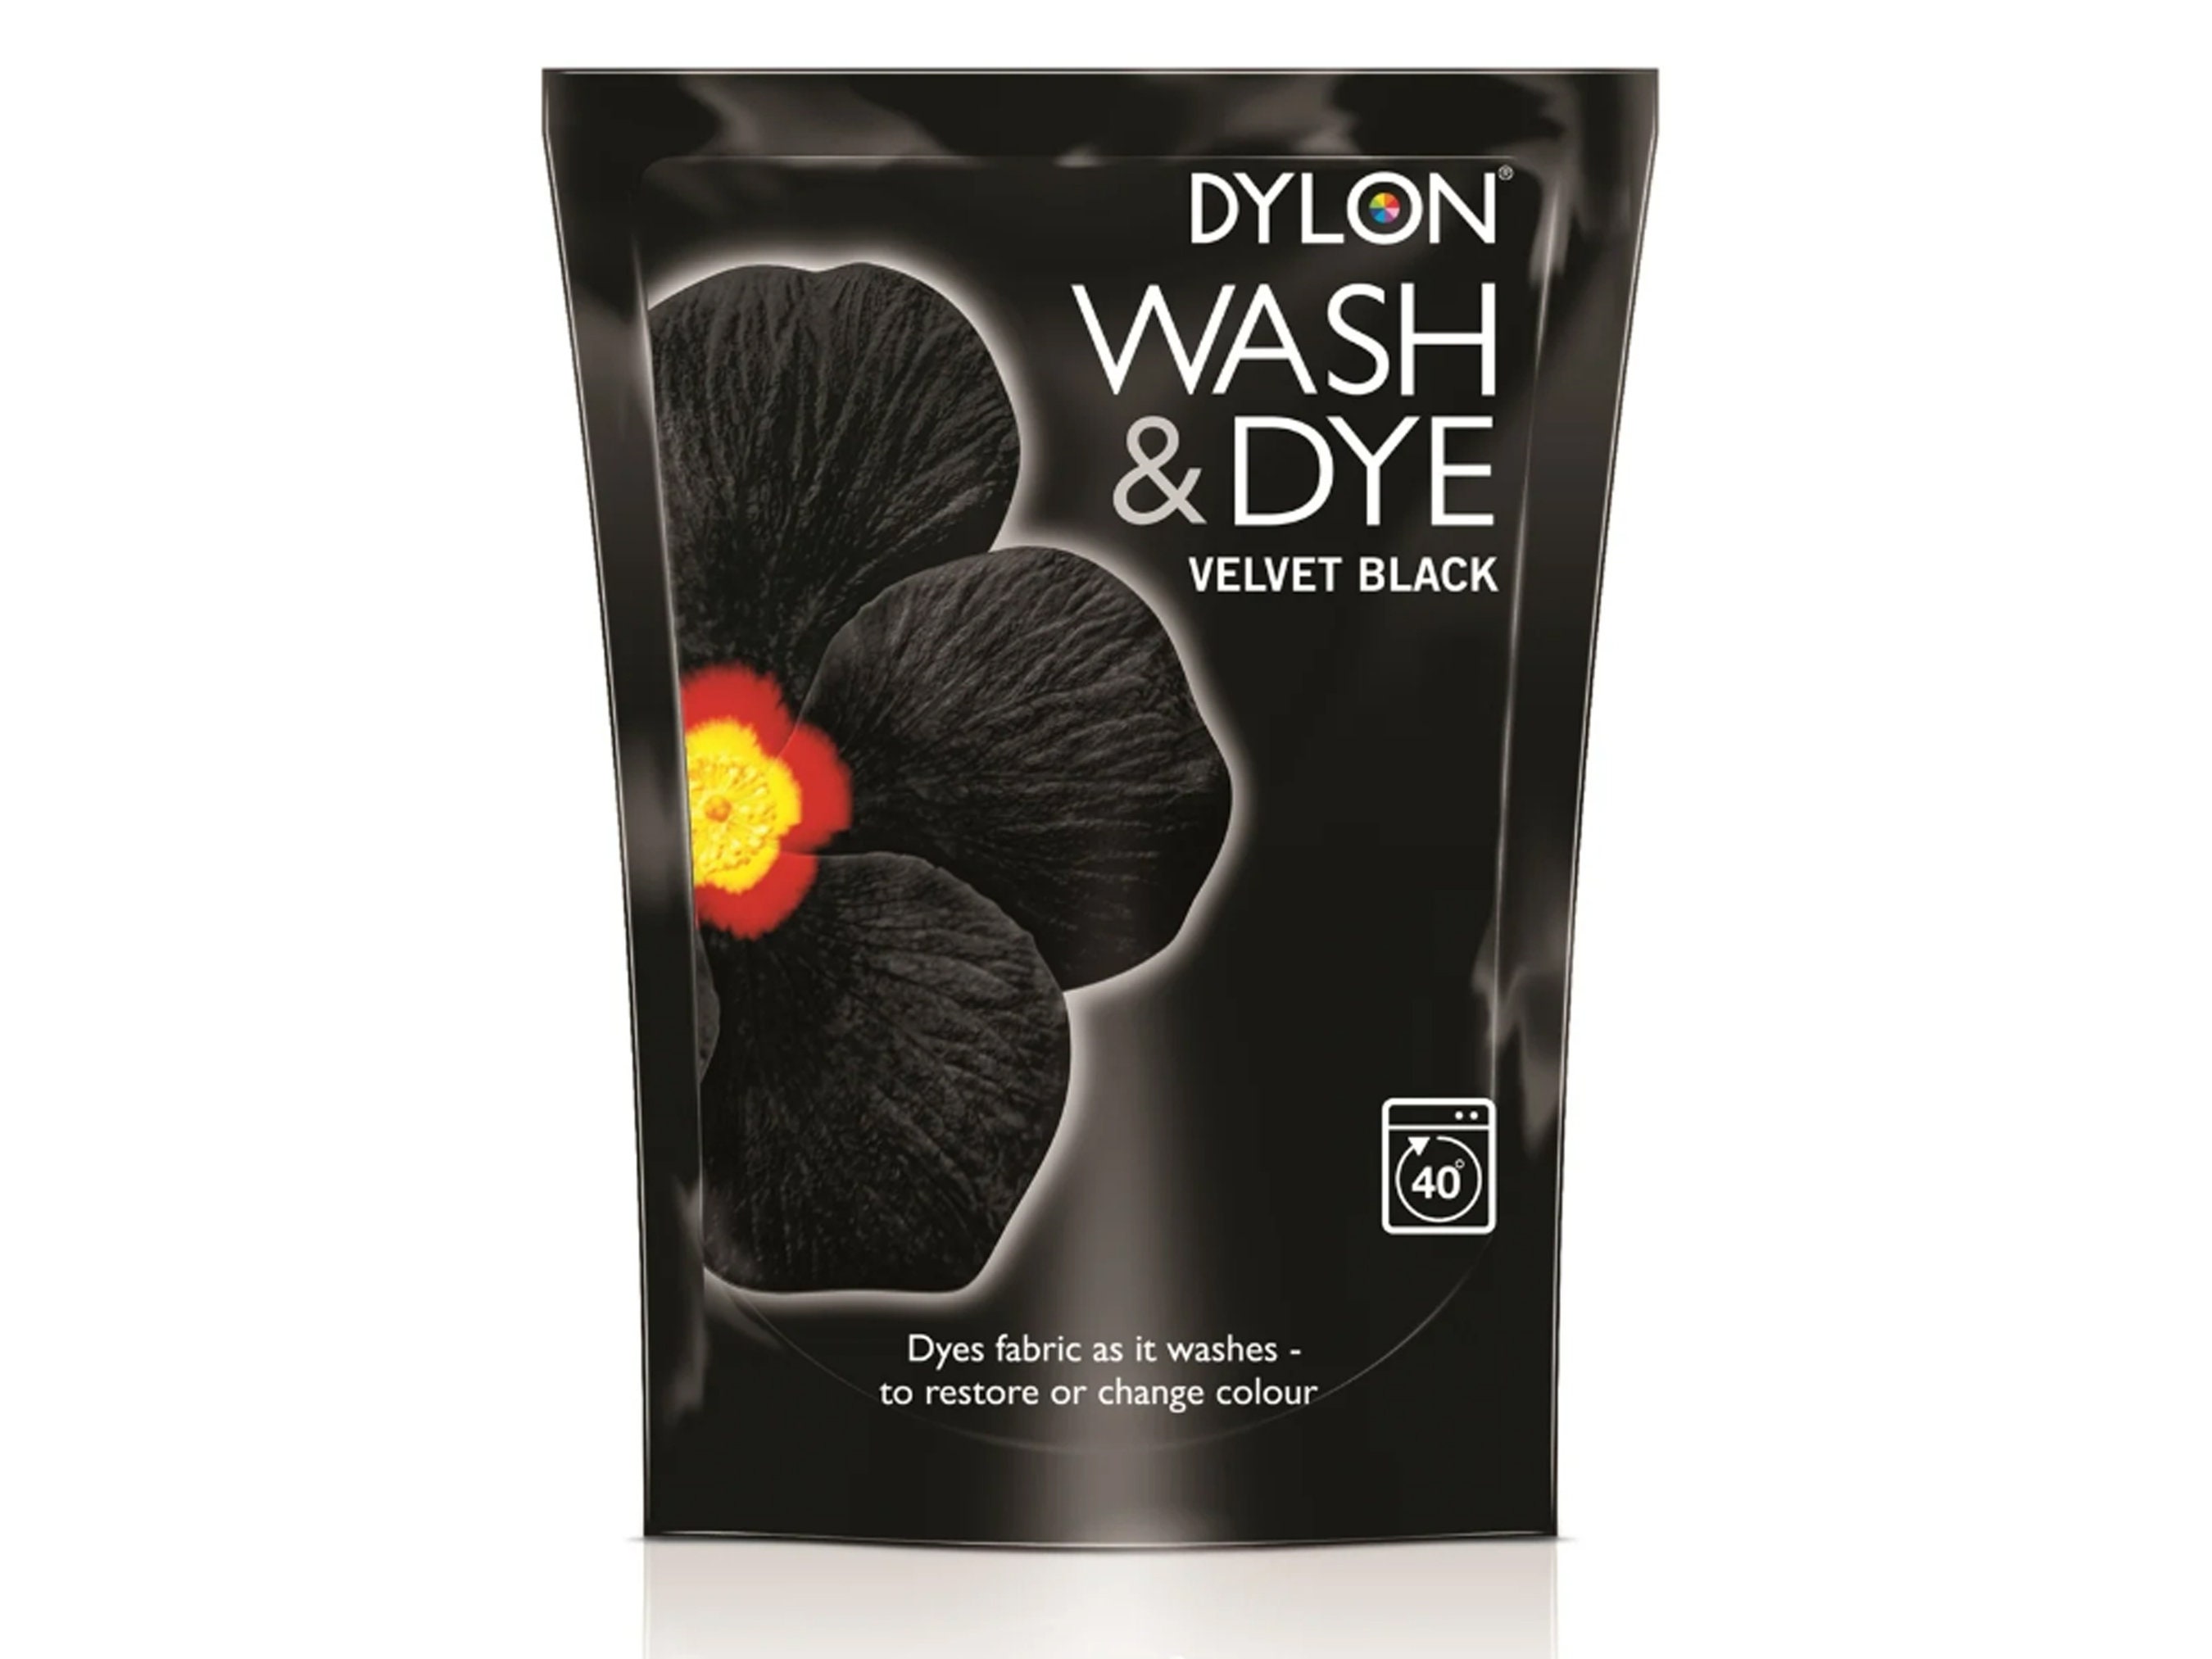 Dylon Washing Fabric Clothes Soft Furnishings Machine Dye Pod Passion Pink  350g, 350 g (Pack of 1), 12 Ounce